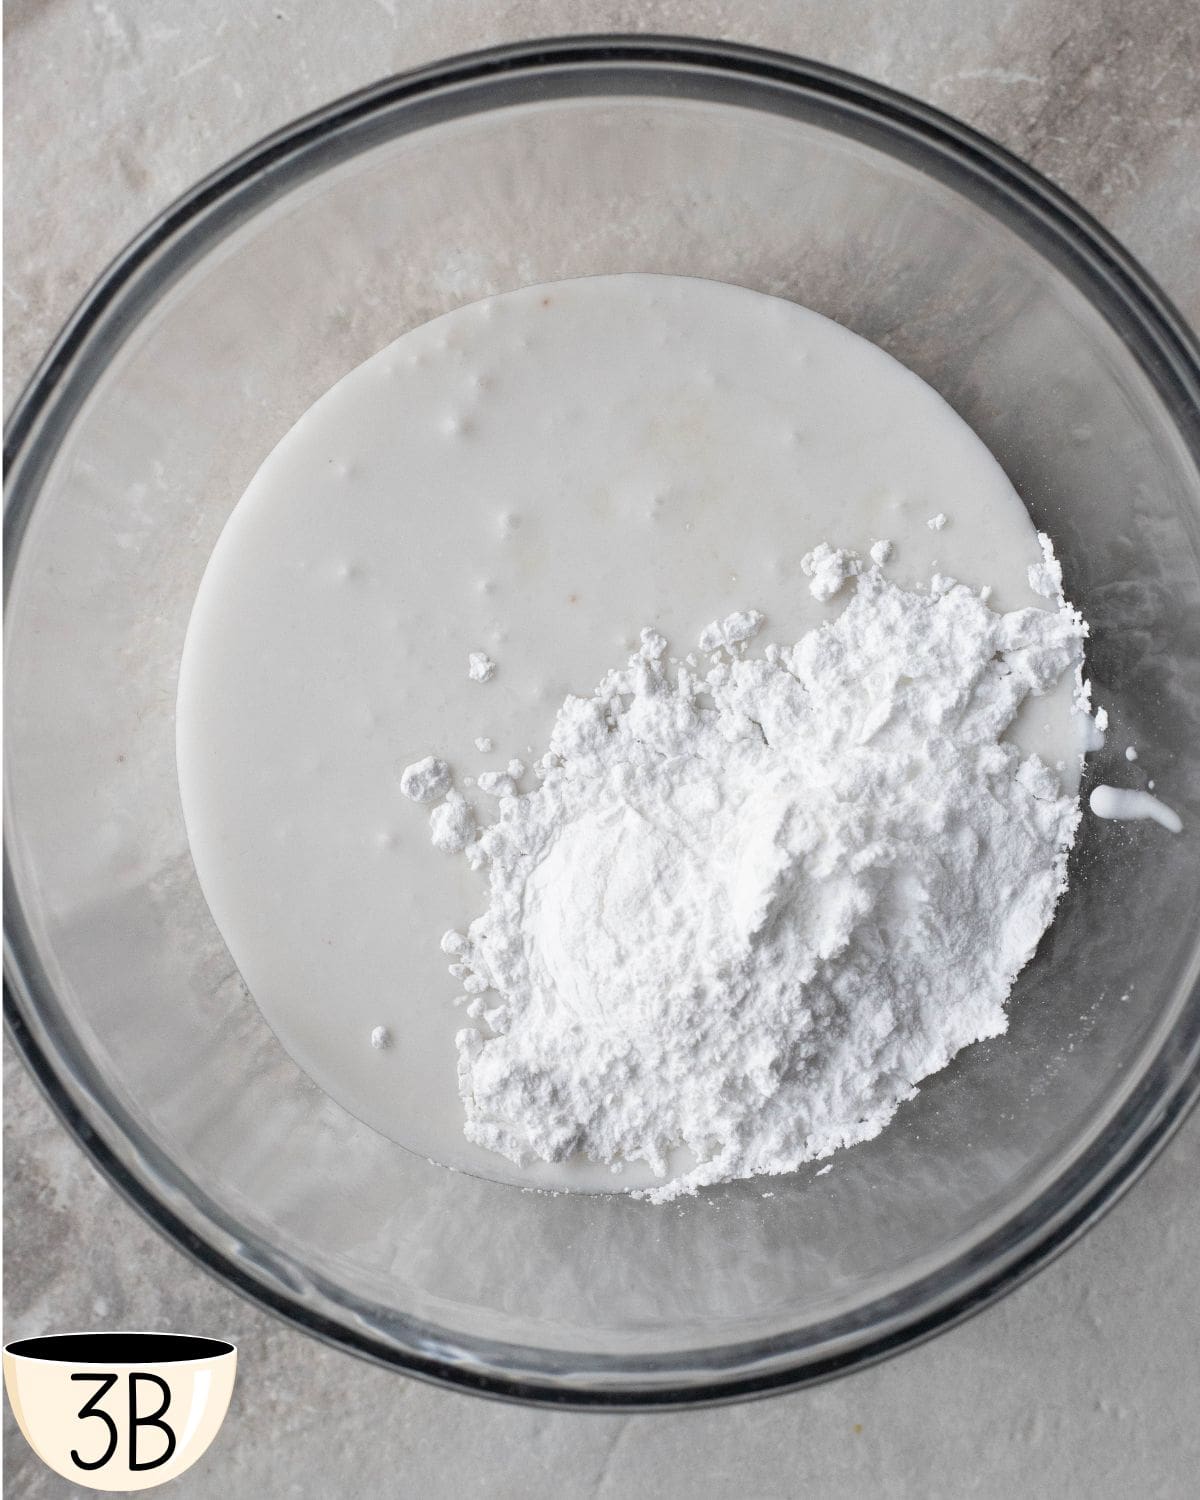 This photo shows the beginning of the whipping process for the coconut cream and powdered sugar, with the dry ingredients just starting to combine with the liquid.